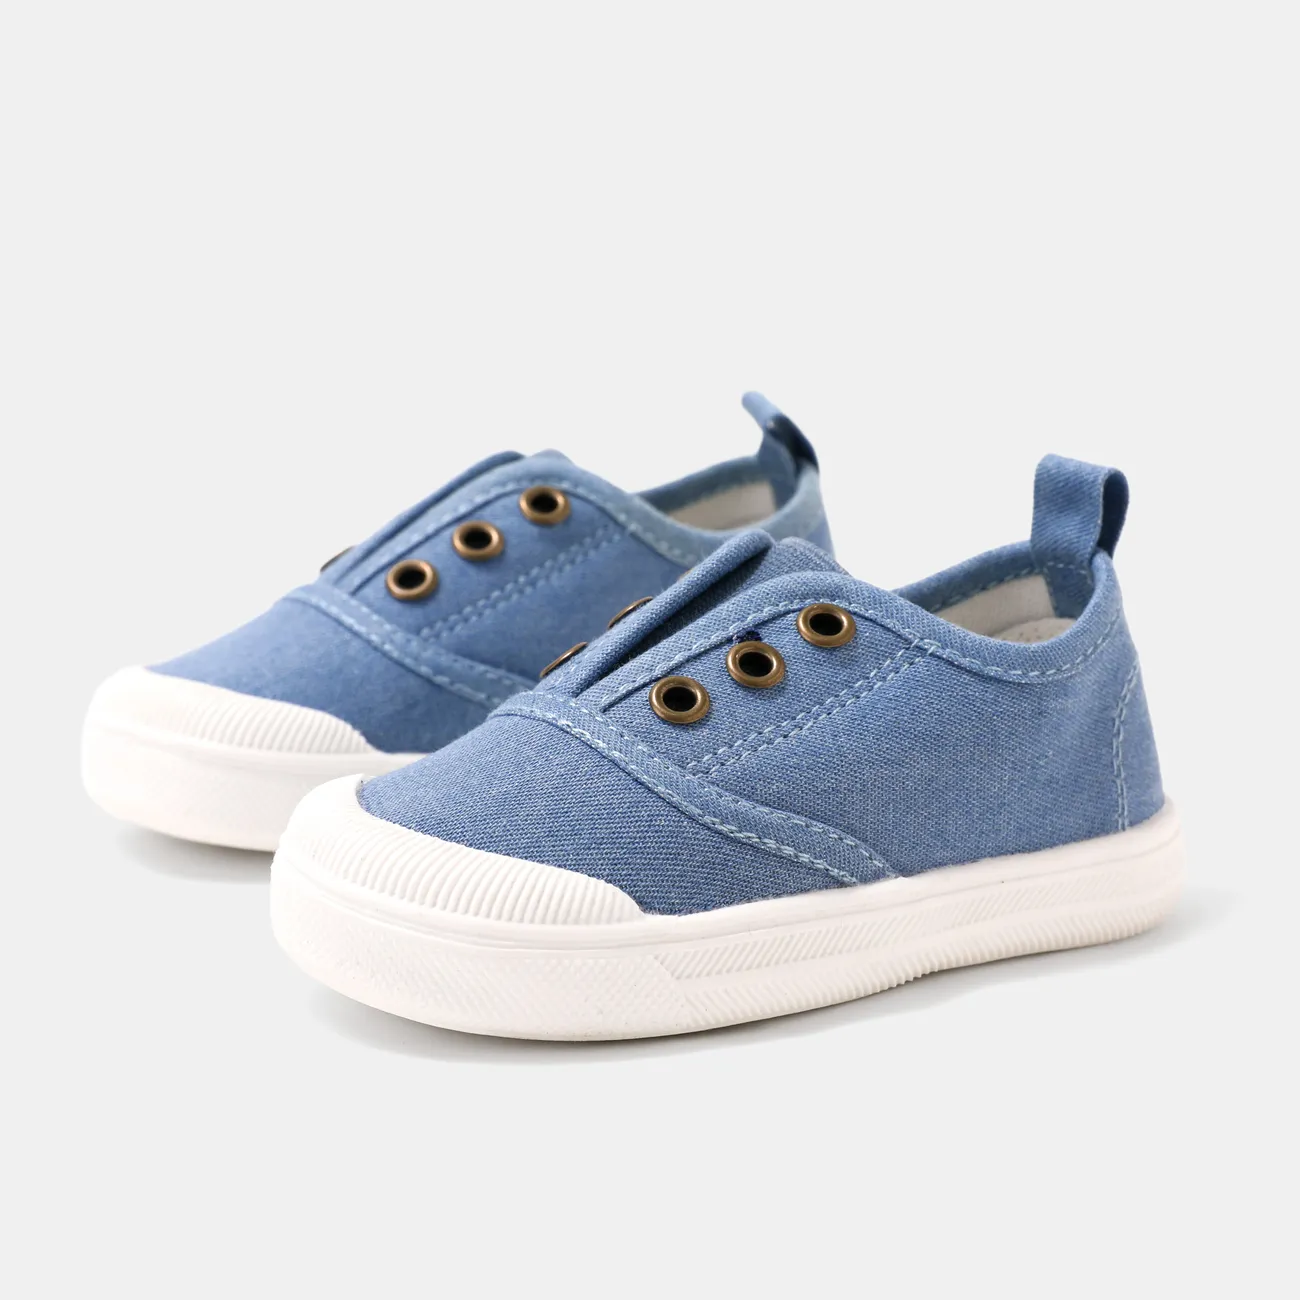 Toddler/Kid Casual Style Navy Blue Canvas Buckle Eyelet Slip-on Shoes Blue big image 1